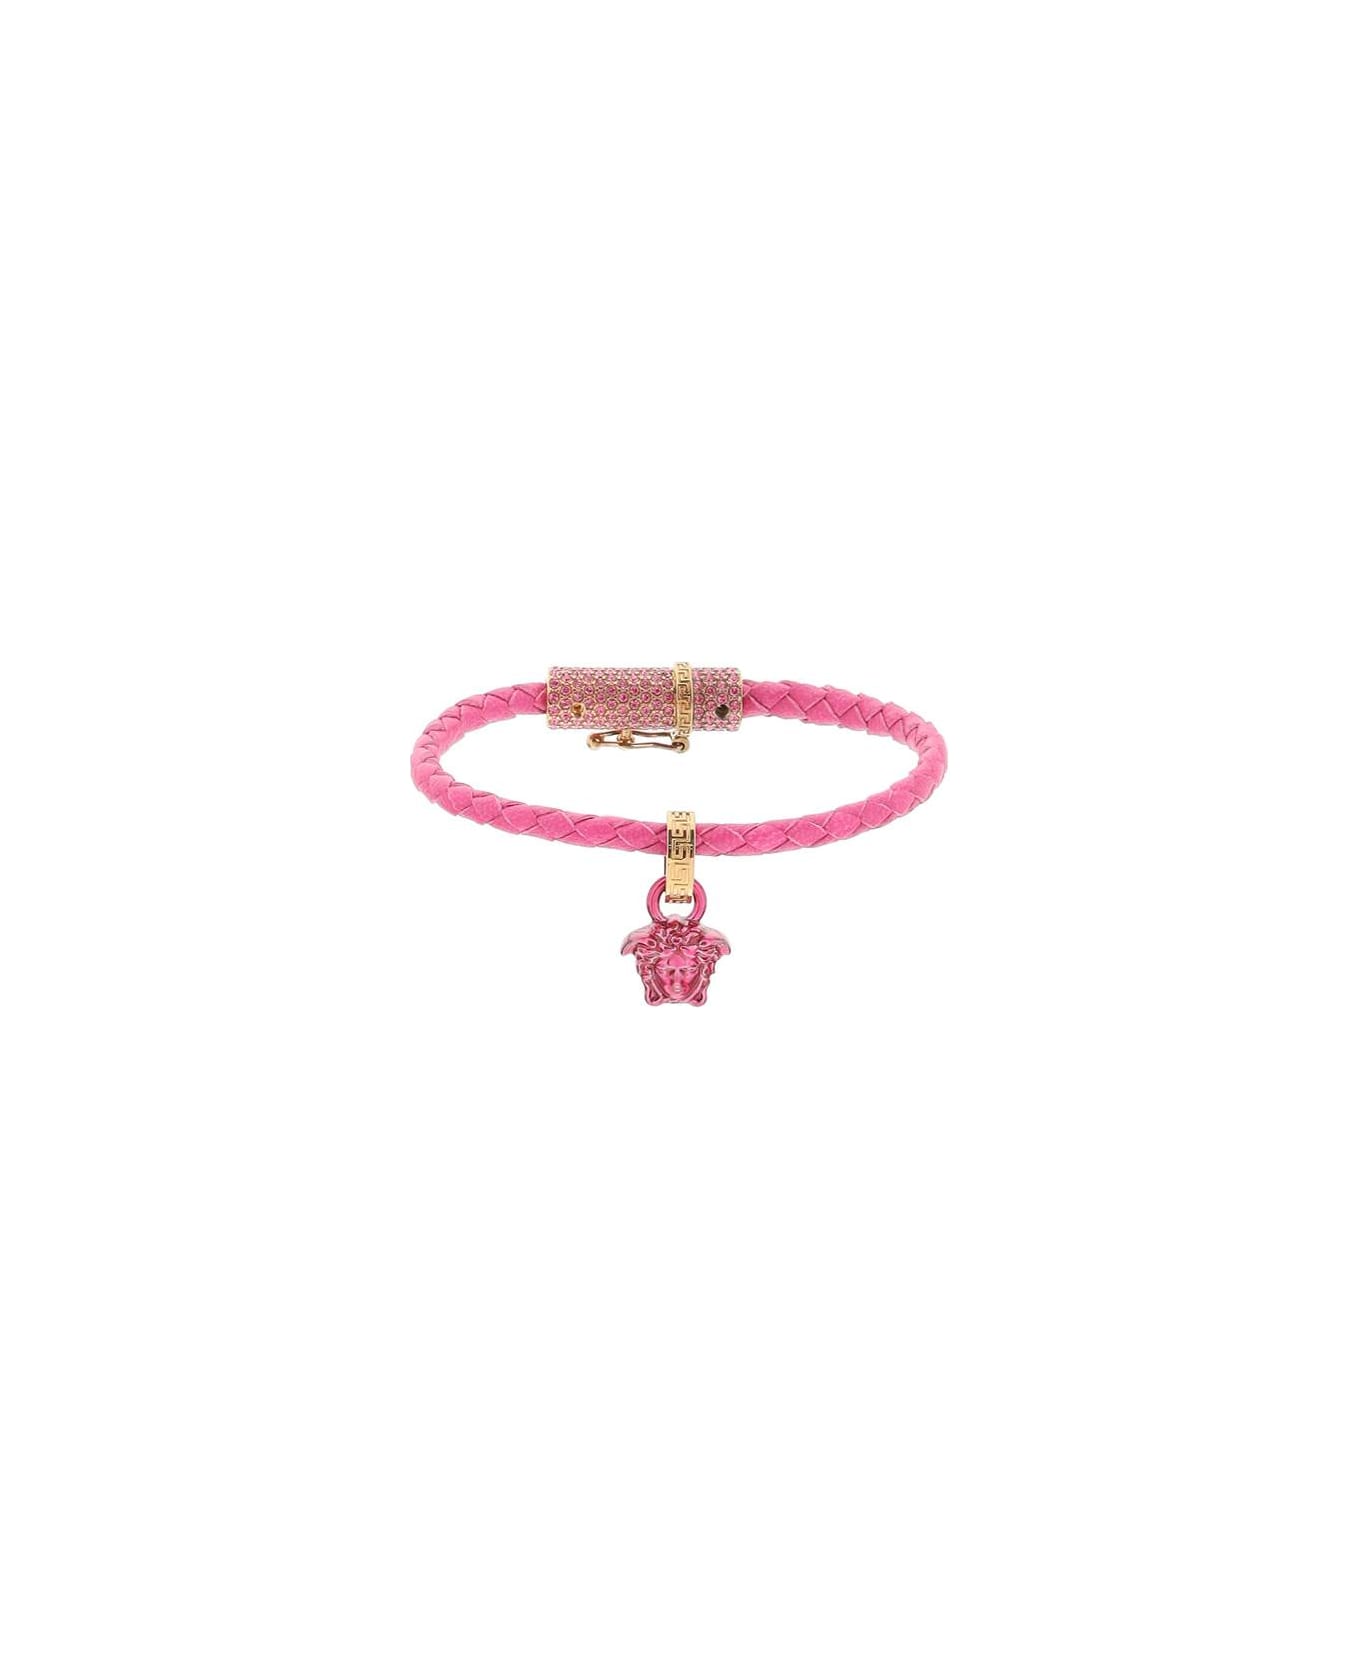 Versace Braided Leather Bracelet - Glossy Pink-oro Versace ブレスレット